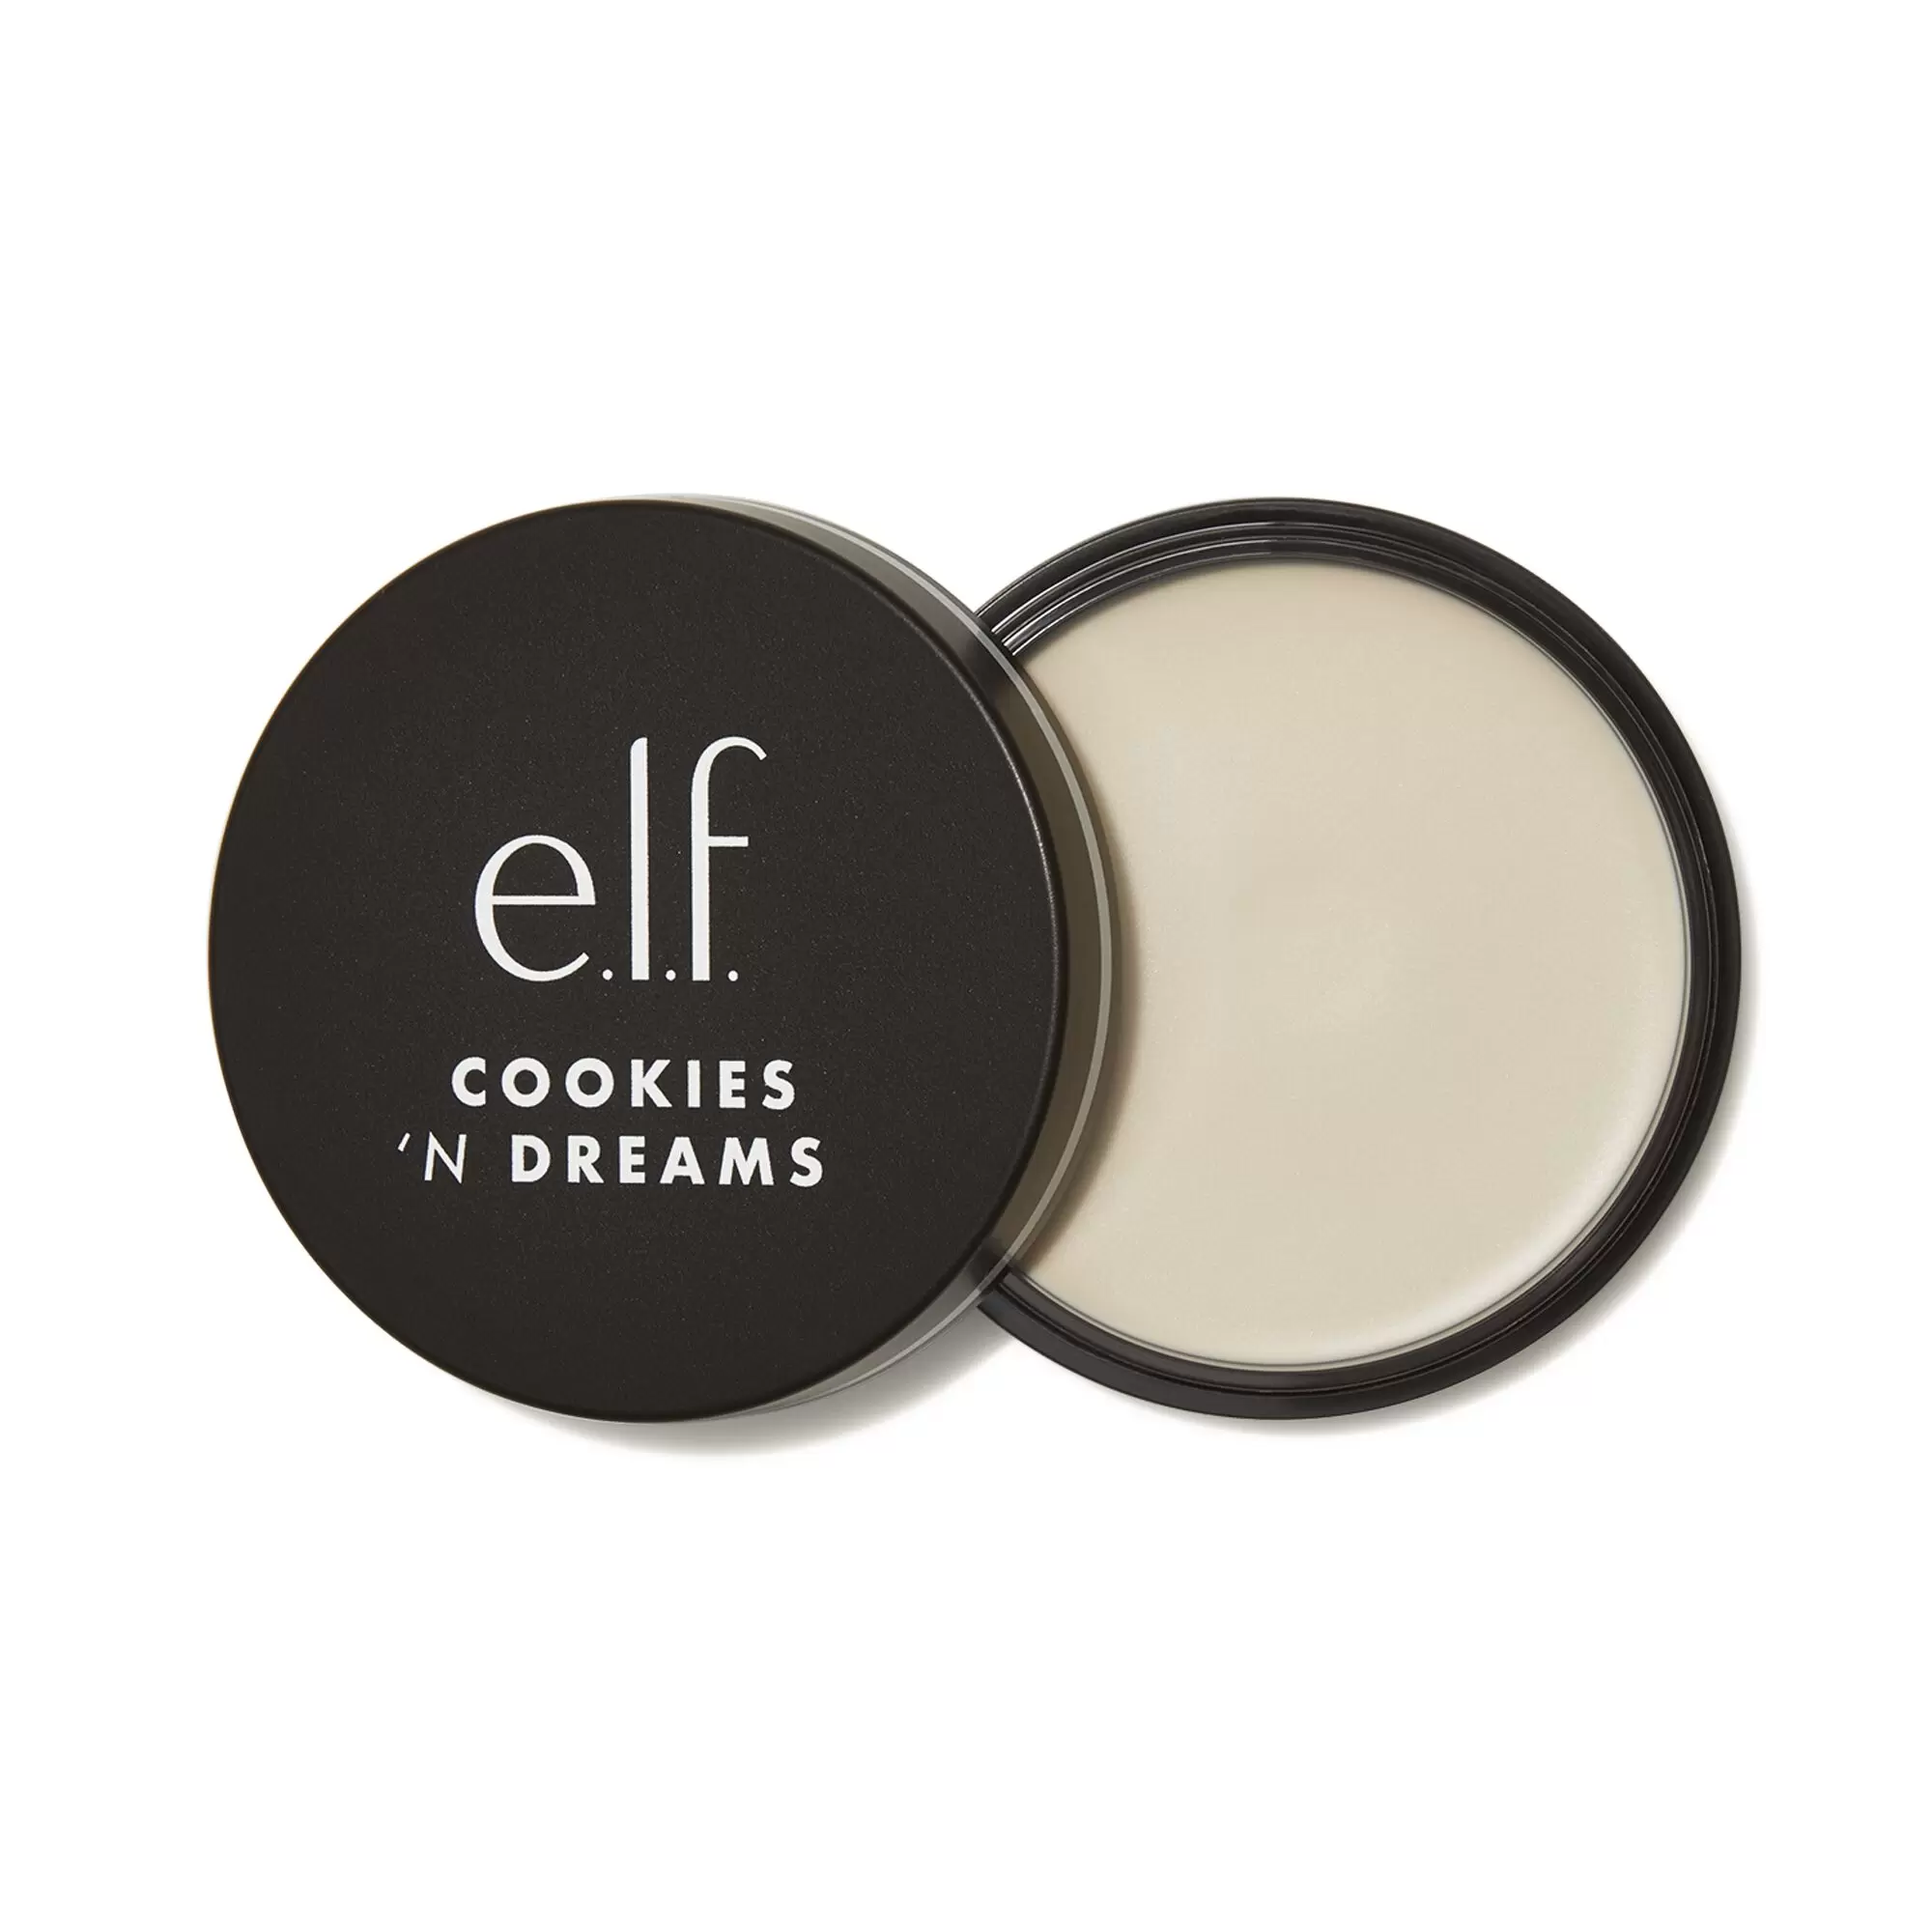 E.L.F. COOKIES 'N DREAMS JUST THE CREAM PUTTY £9.00